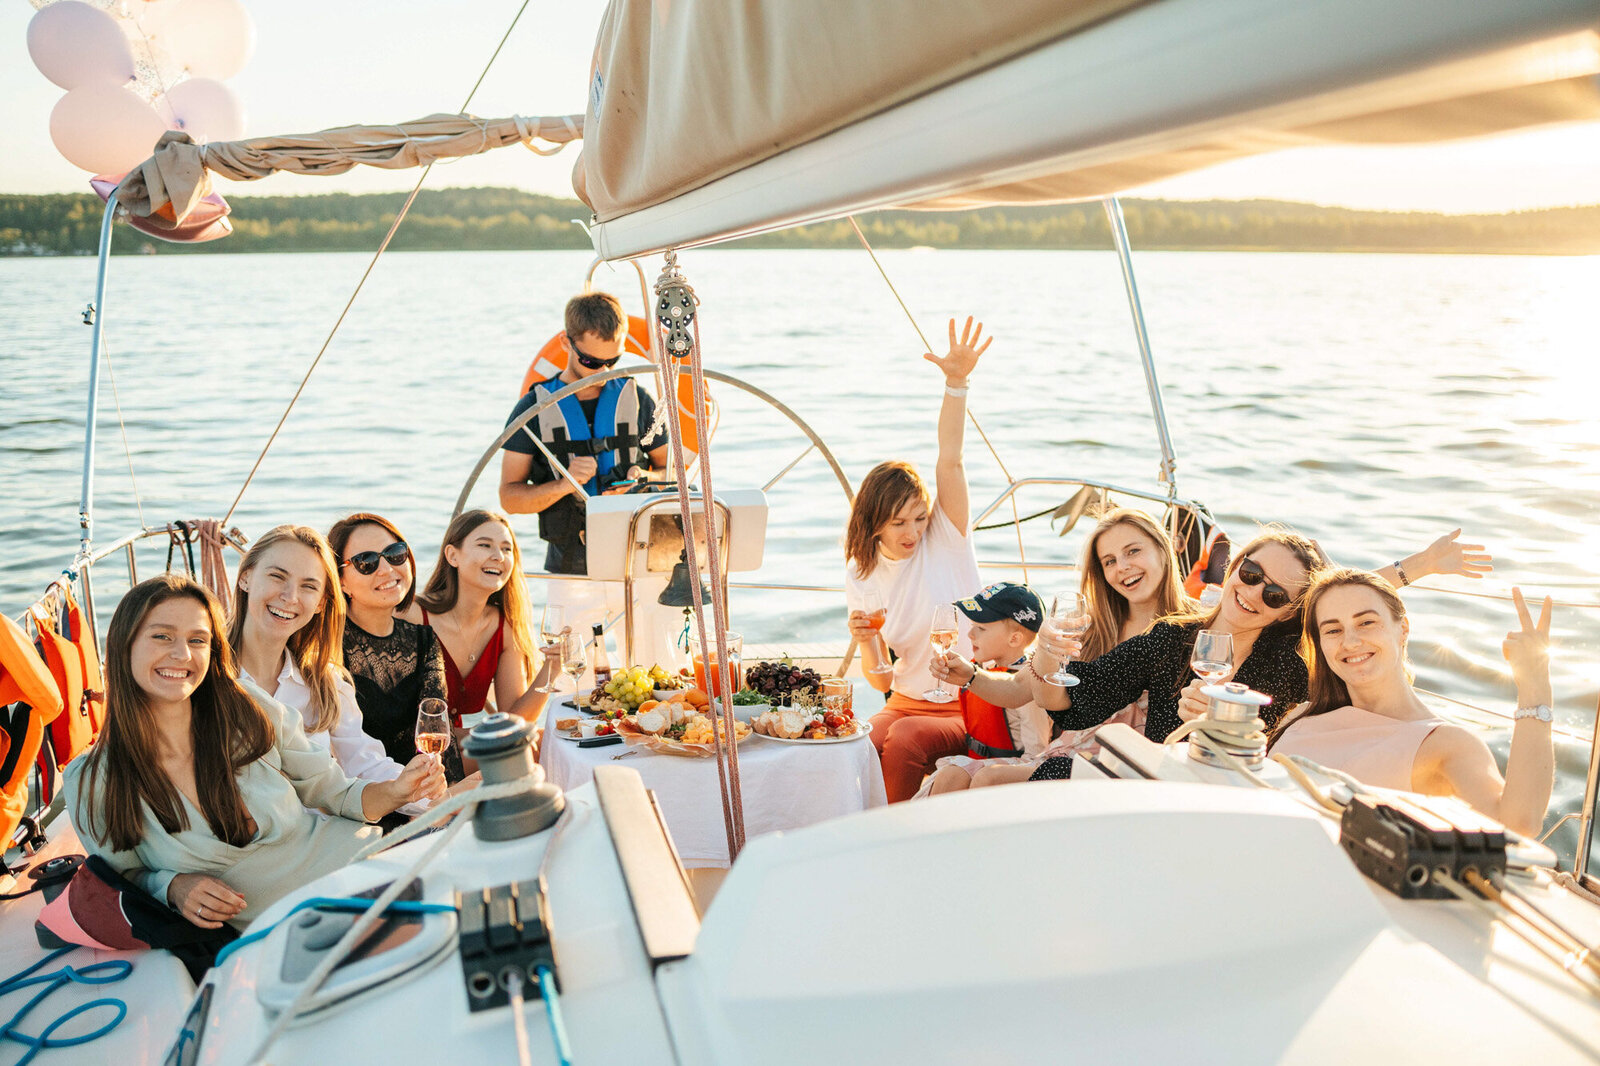 Group of friends having fun and sailing in the ocean through a yacht